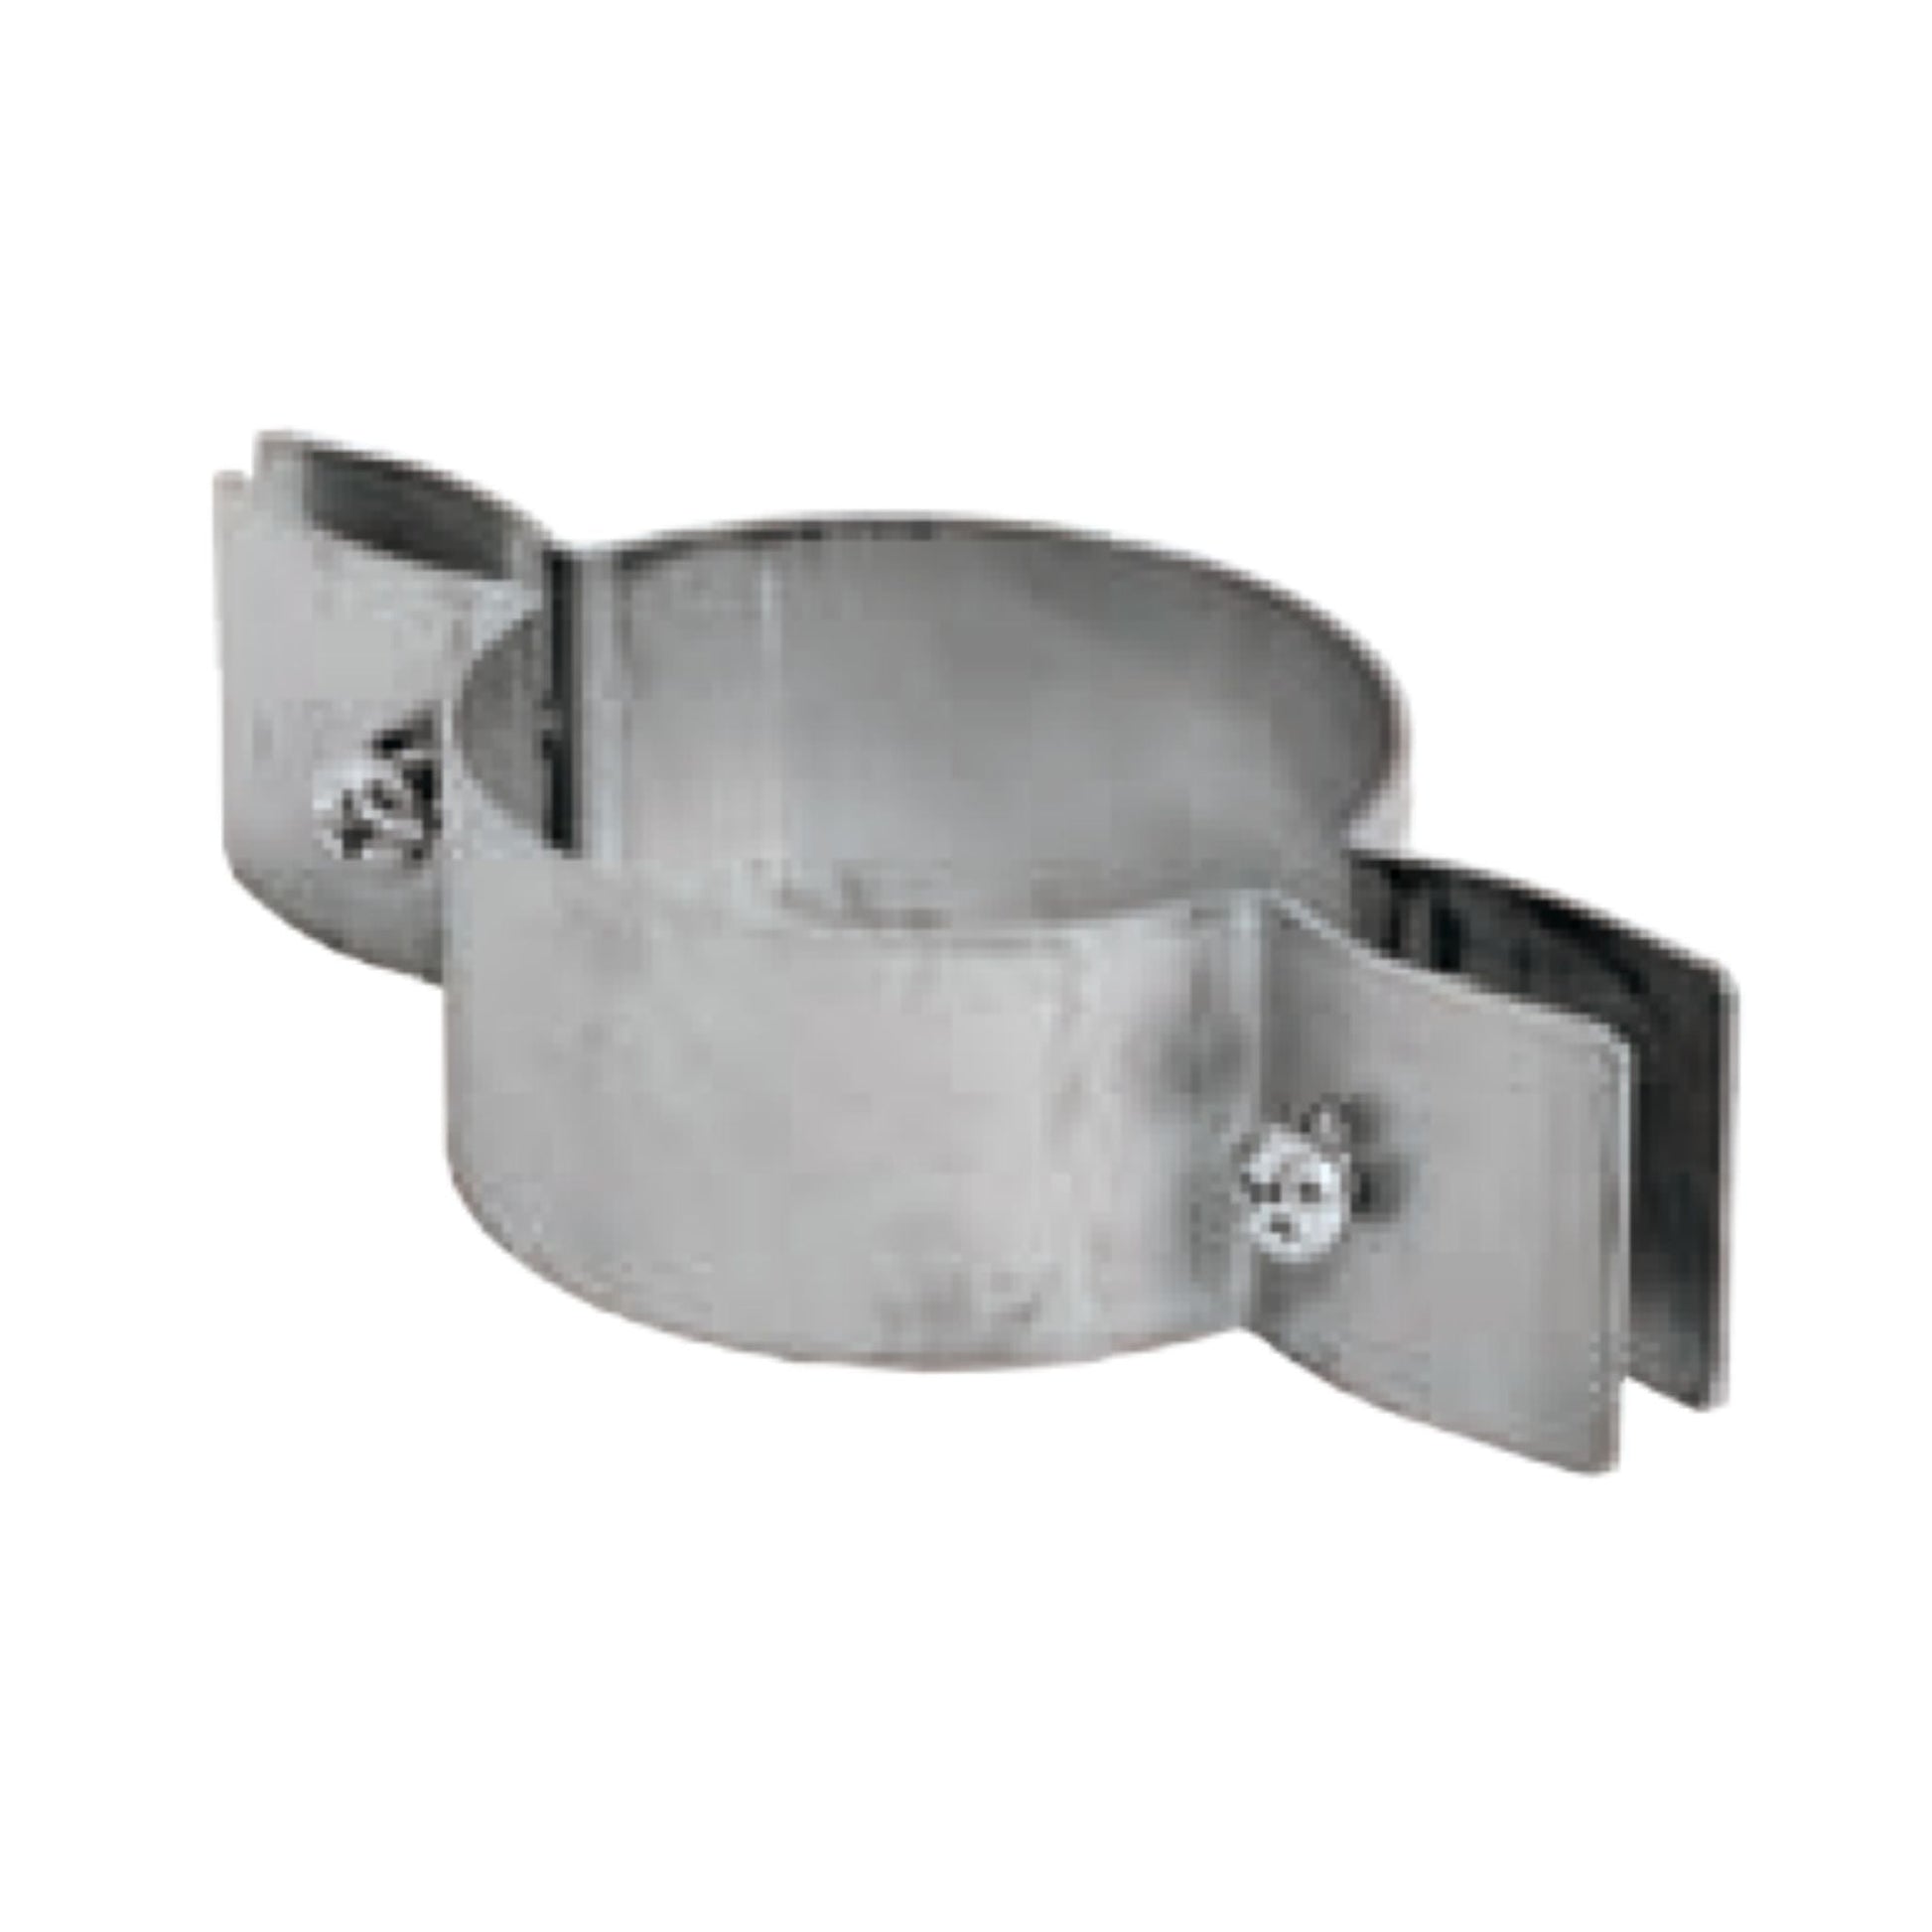 DuraVent FasNSeal 4" 29-4C Stainless Steel Support Clamp